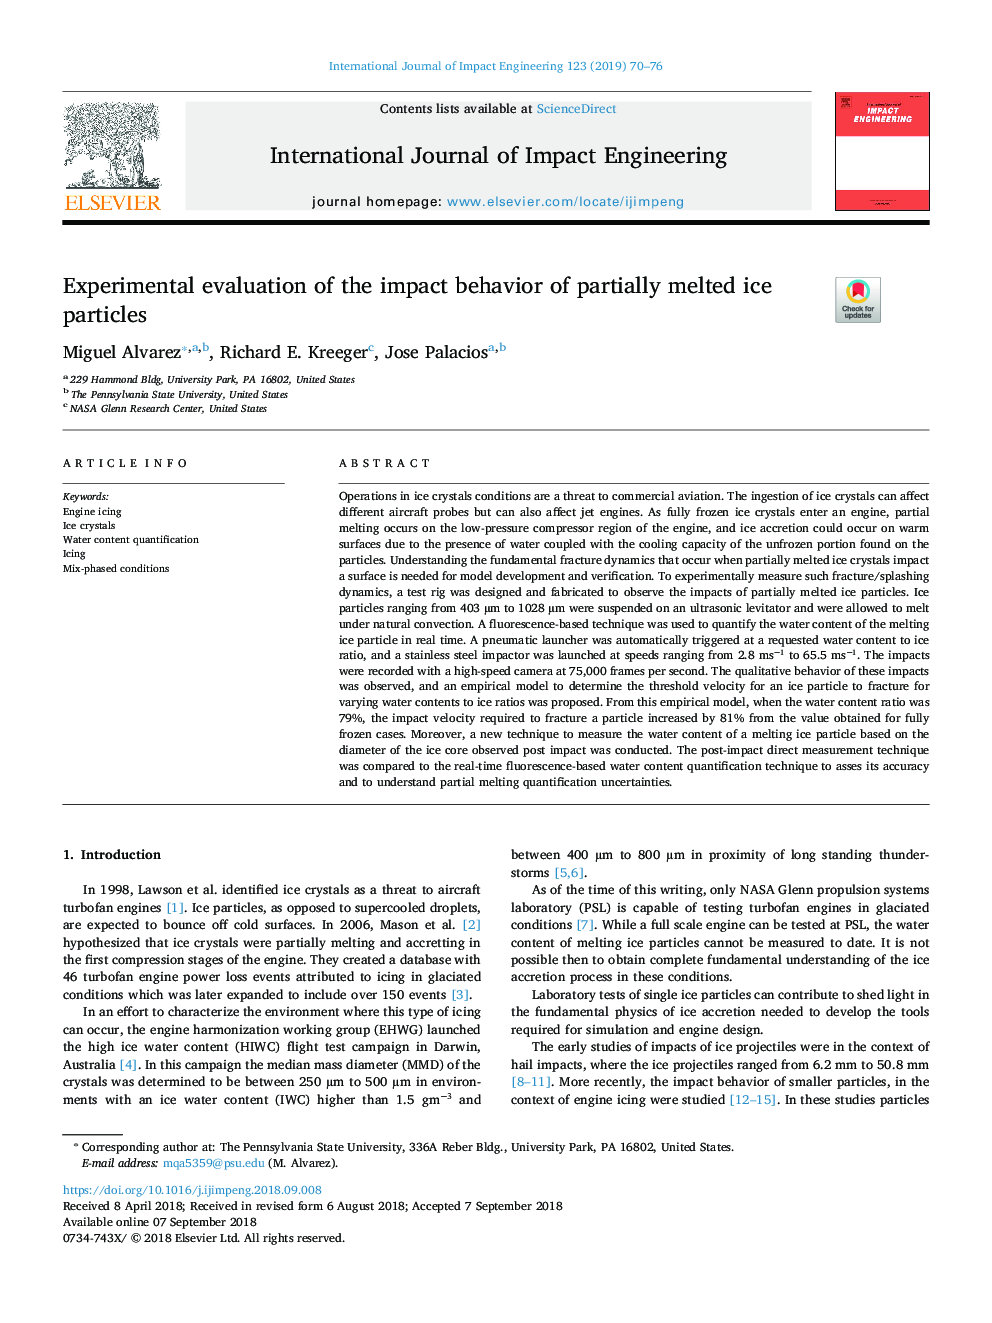 Experimental evaluation of the impact behavior of partially melted ice particles